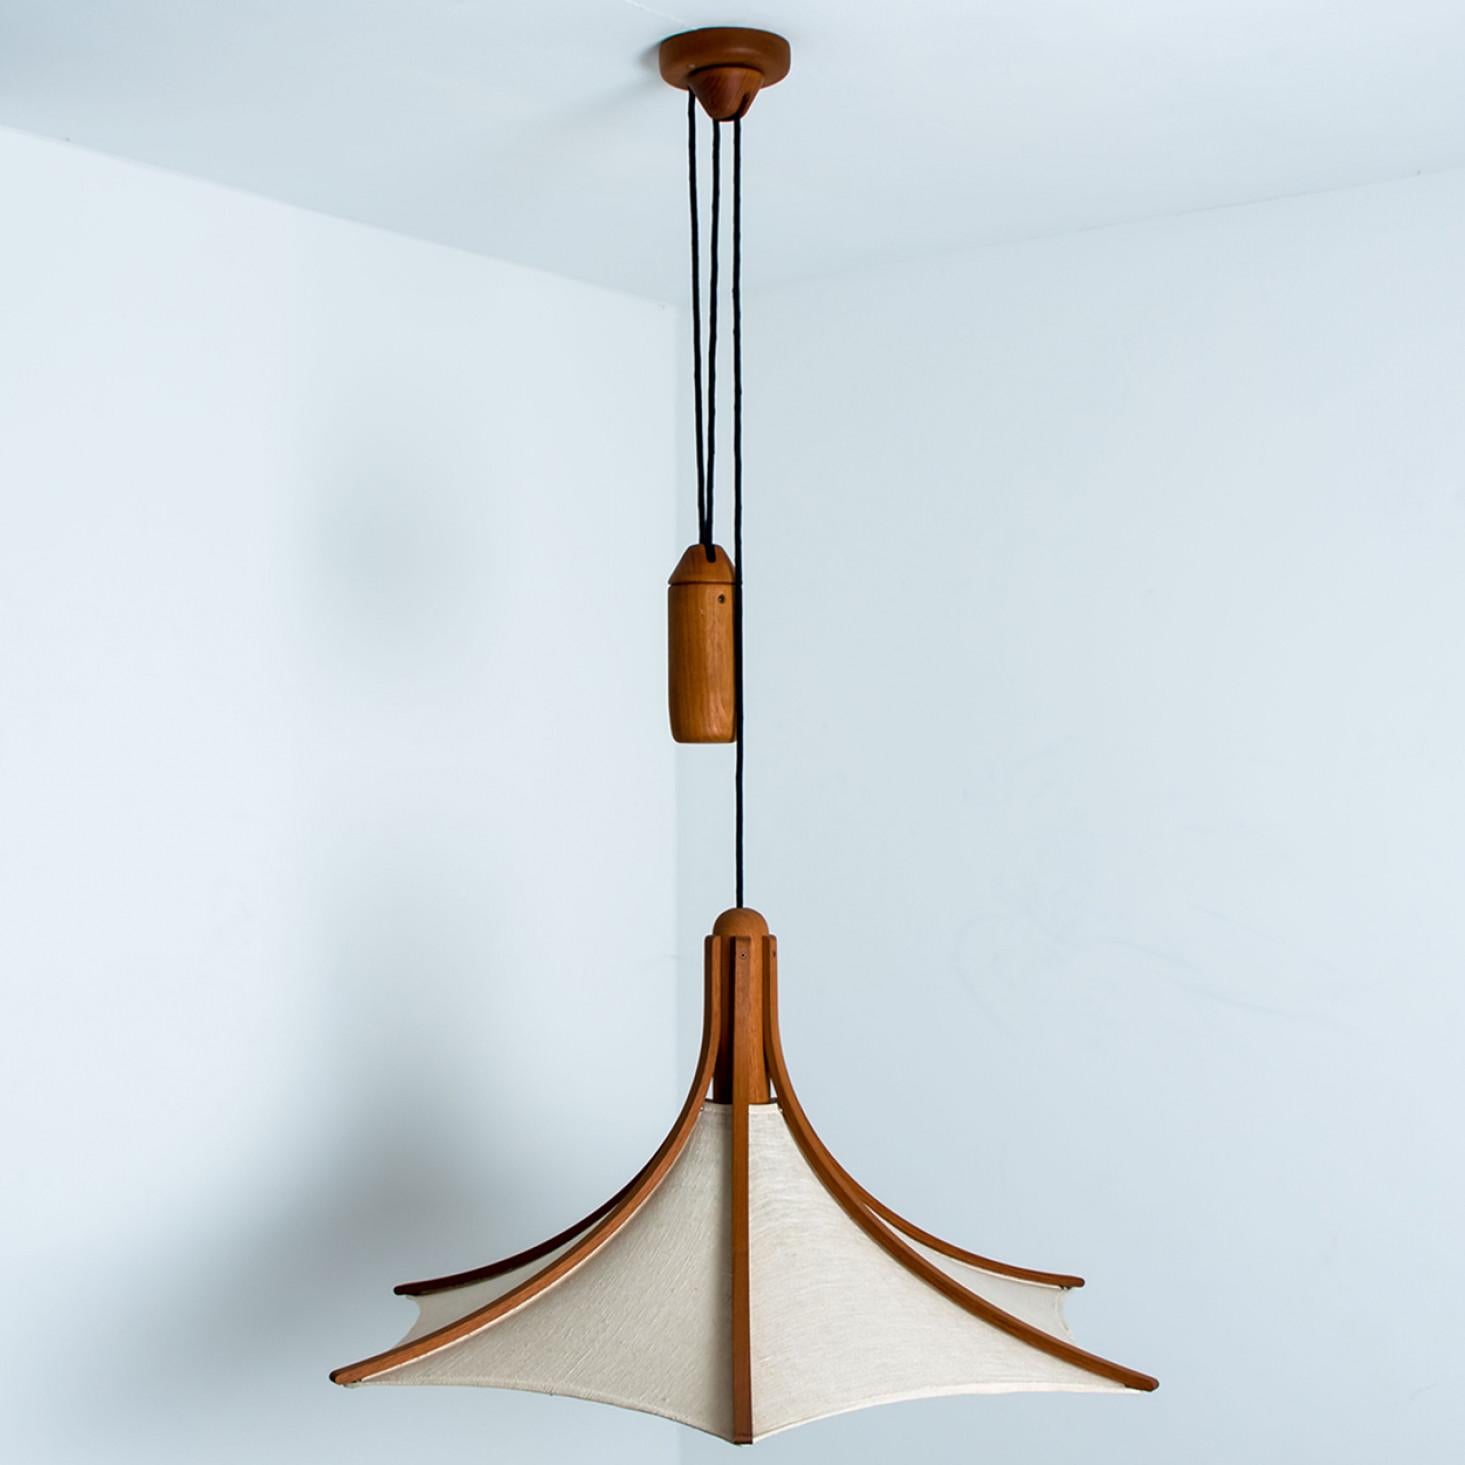 Wonderful oak pendant light with new lampshade by Le Klint. The light is manufactured by Domus in the 1970s in Germany, Europe.
The oak base is adjustable in height. The beautiful, folded lampshade diffuses a warm light.

